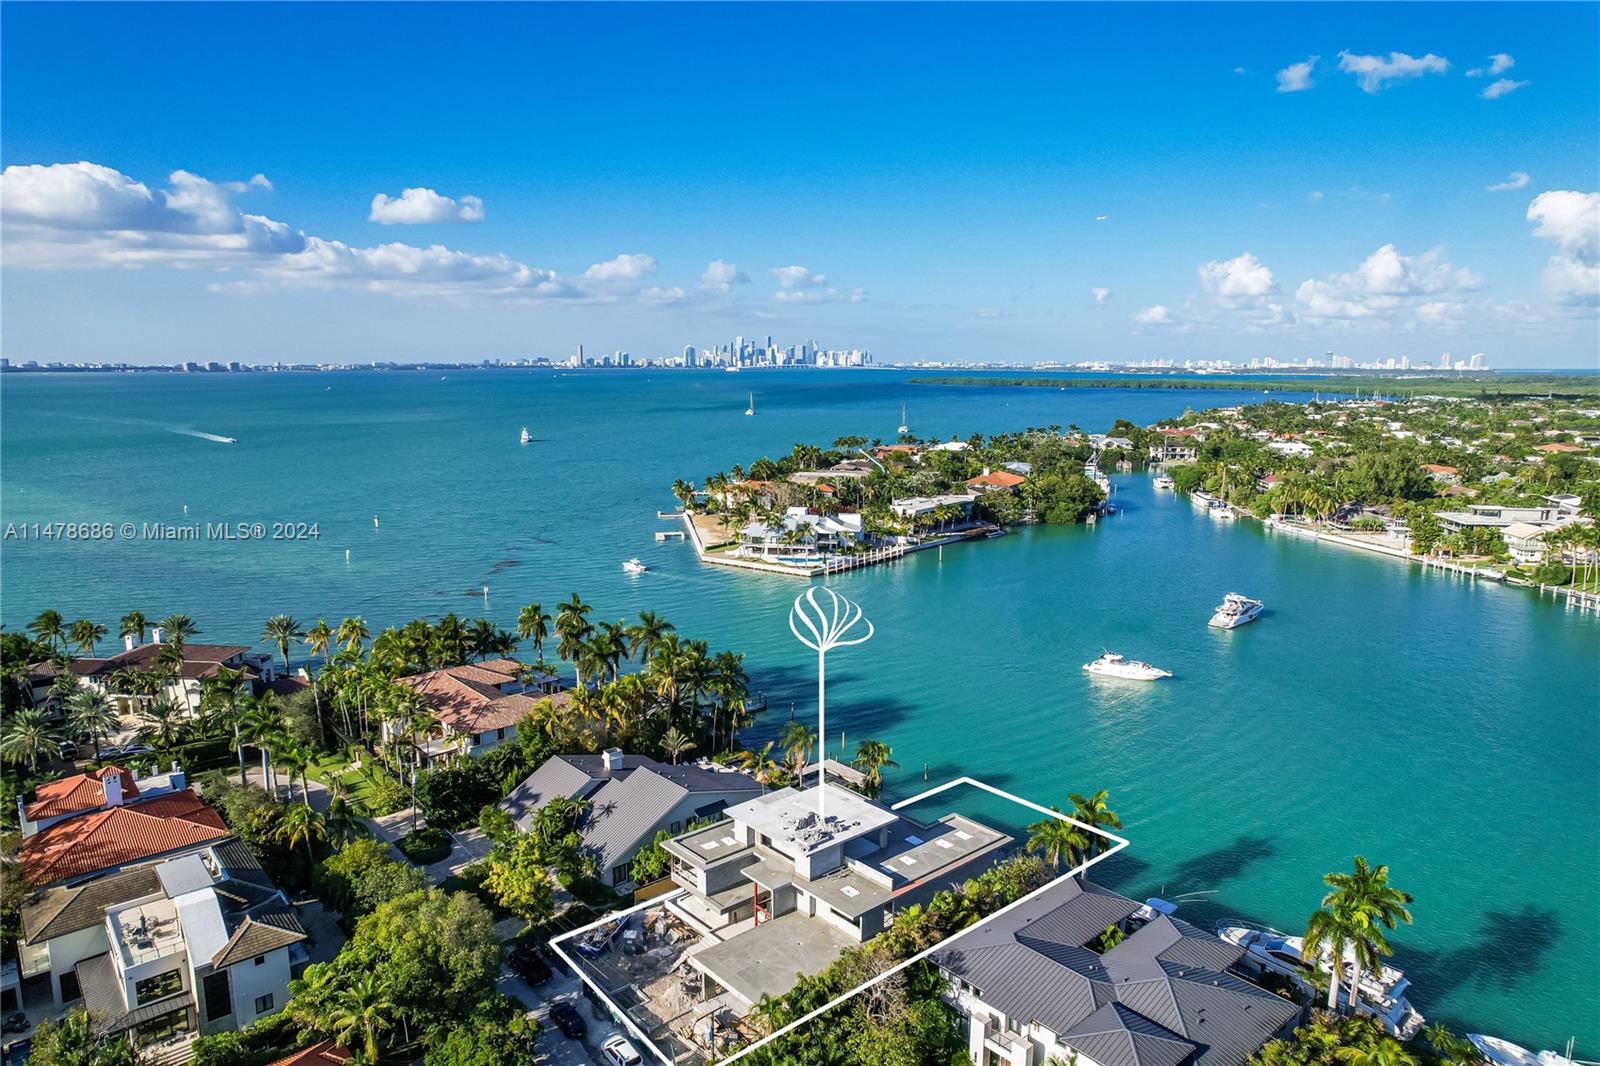 Experience unparalleled luxury in this brand-new waterfront residence on exclusive Mashta Island in Key Biscayne. With 100 feet of prime waterfront, this home offers direct ocean access. The design features ultra-luxurious finishes, including curtain glass fixed windows maximizing water views. Spanning 9,550 sq ft, with 7 bedrooms, 9 full bathrooms, and 2 half bathrooms. The rooftop area and observation deck offer 360° views, including the Miami skyline and sunset. A residential-class elevator services all floors. The wide covered terrace by the pool features an alfresco kitchen, ideal for all-day enjoyment. Other features include covered parking for 3 cars. This home is a waterfront masterpiece. Under Construction set to be finished September 2024.